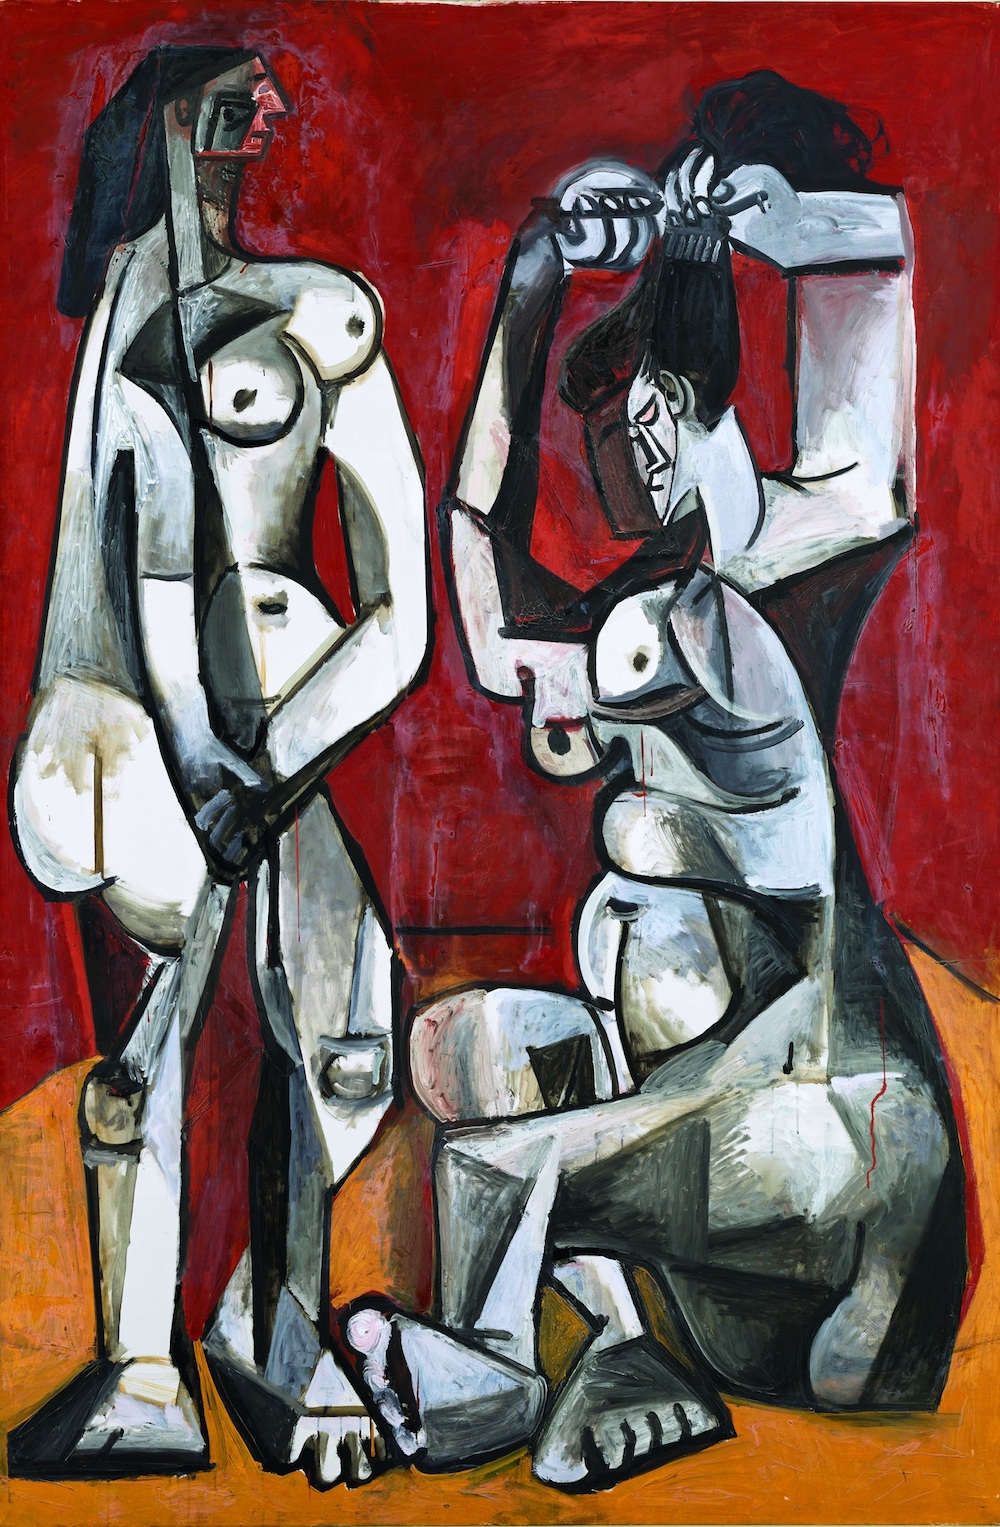 Pablo Picasso (1881-1973), Women at Their Toilette, Cannes, January 4, 1956. Â© Estate of Picasso / SODRAC (2018). Photo Â© RMN-Grand Palais / Art Resource, NY / Mathieu Rabeau